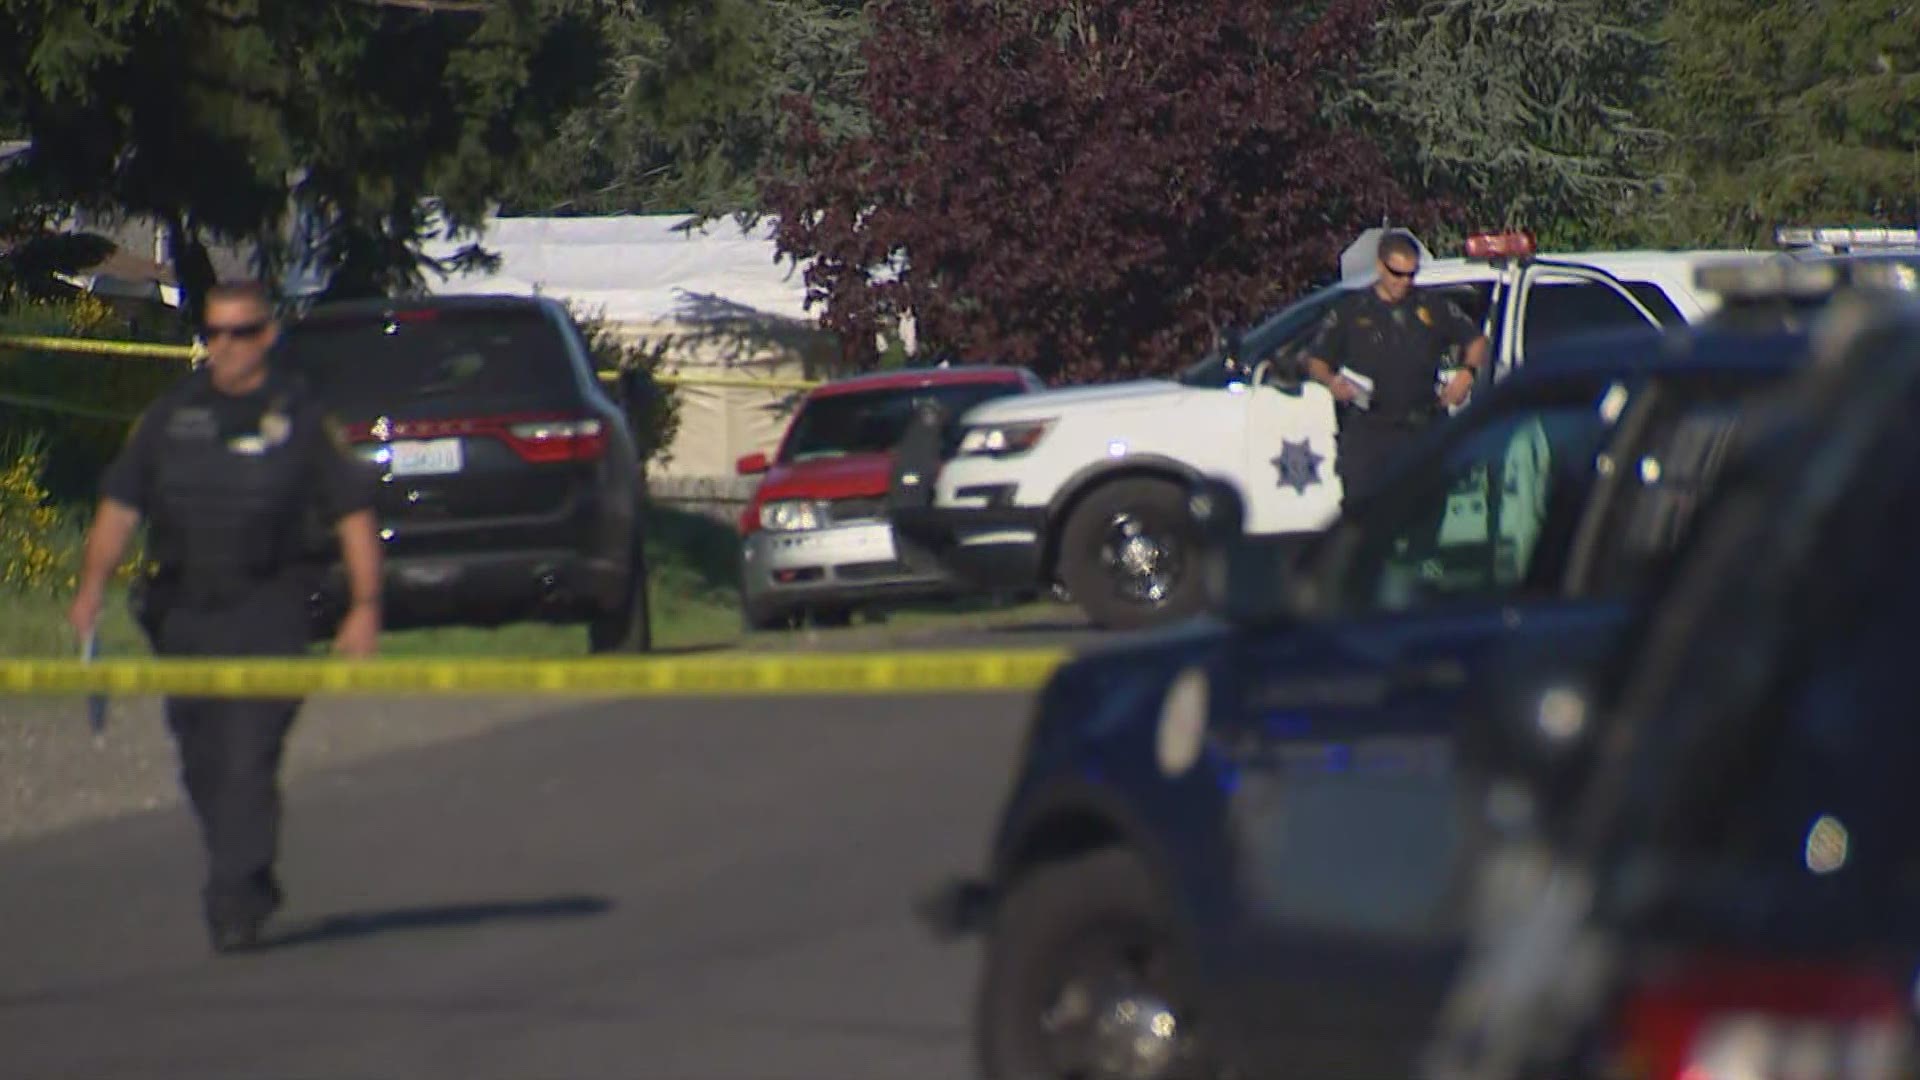 A suspect is dead after shooting at a Pierce County Sheriff deputy Wednesday evening.